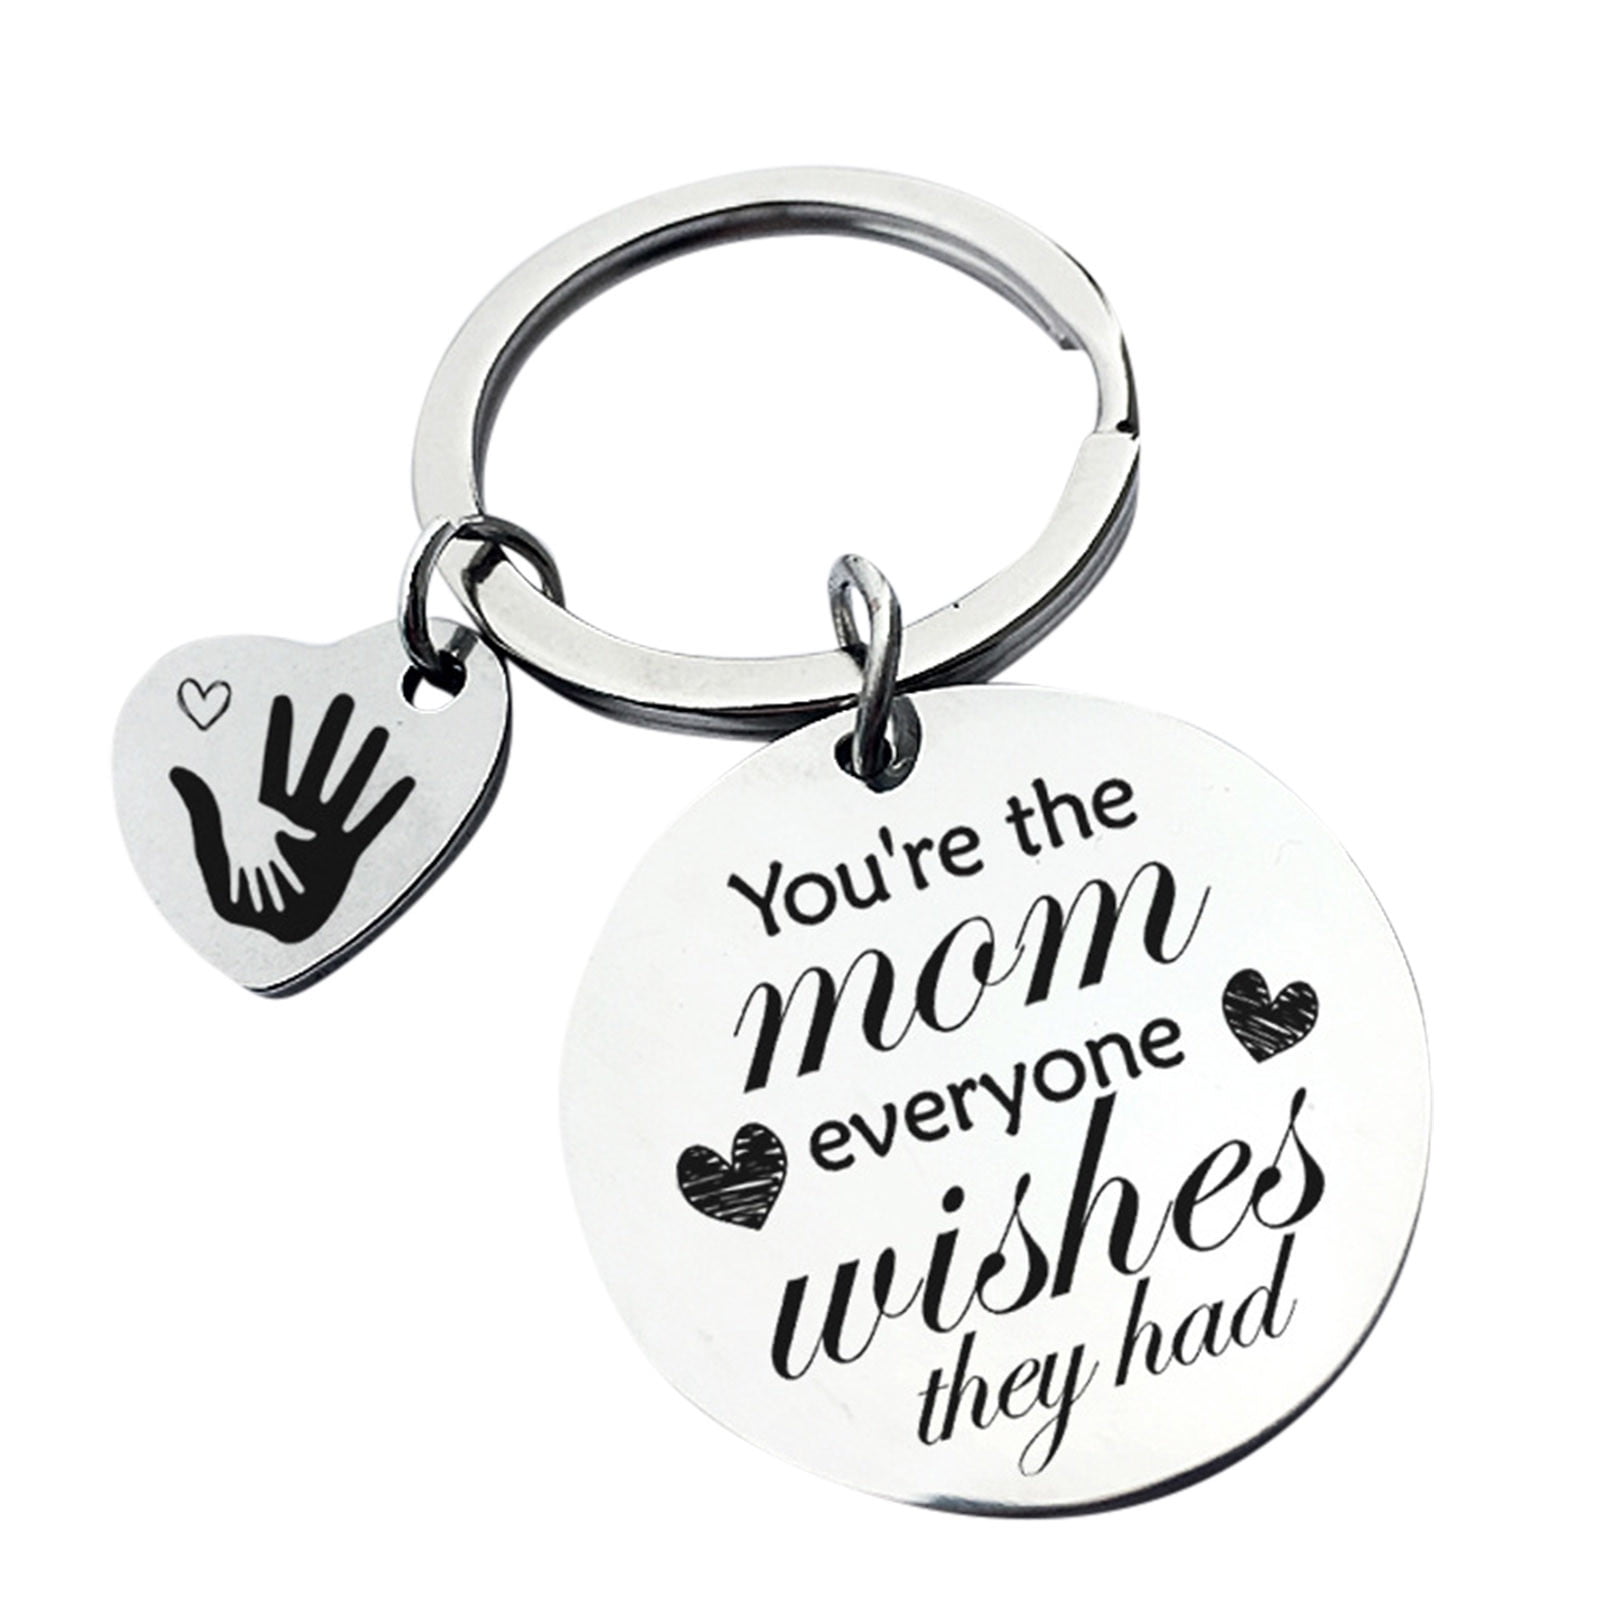 Details about   Stainless Steel Keyring I Love You More The End I Win Keychain Couples Gift 